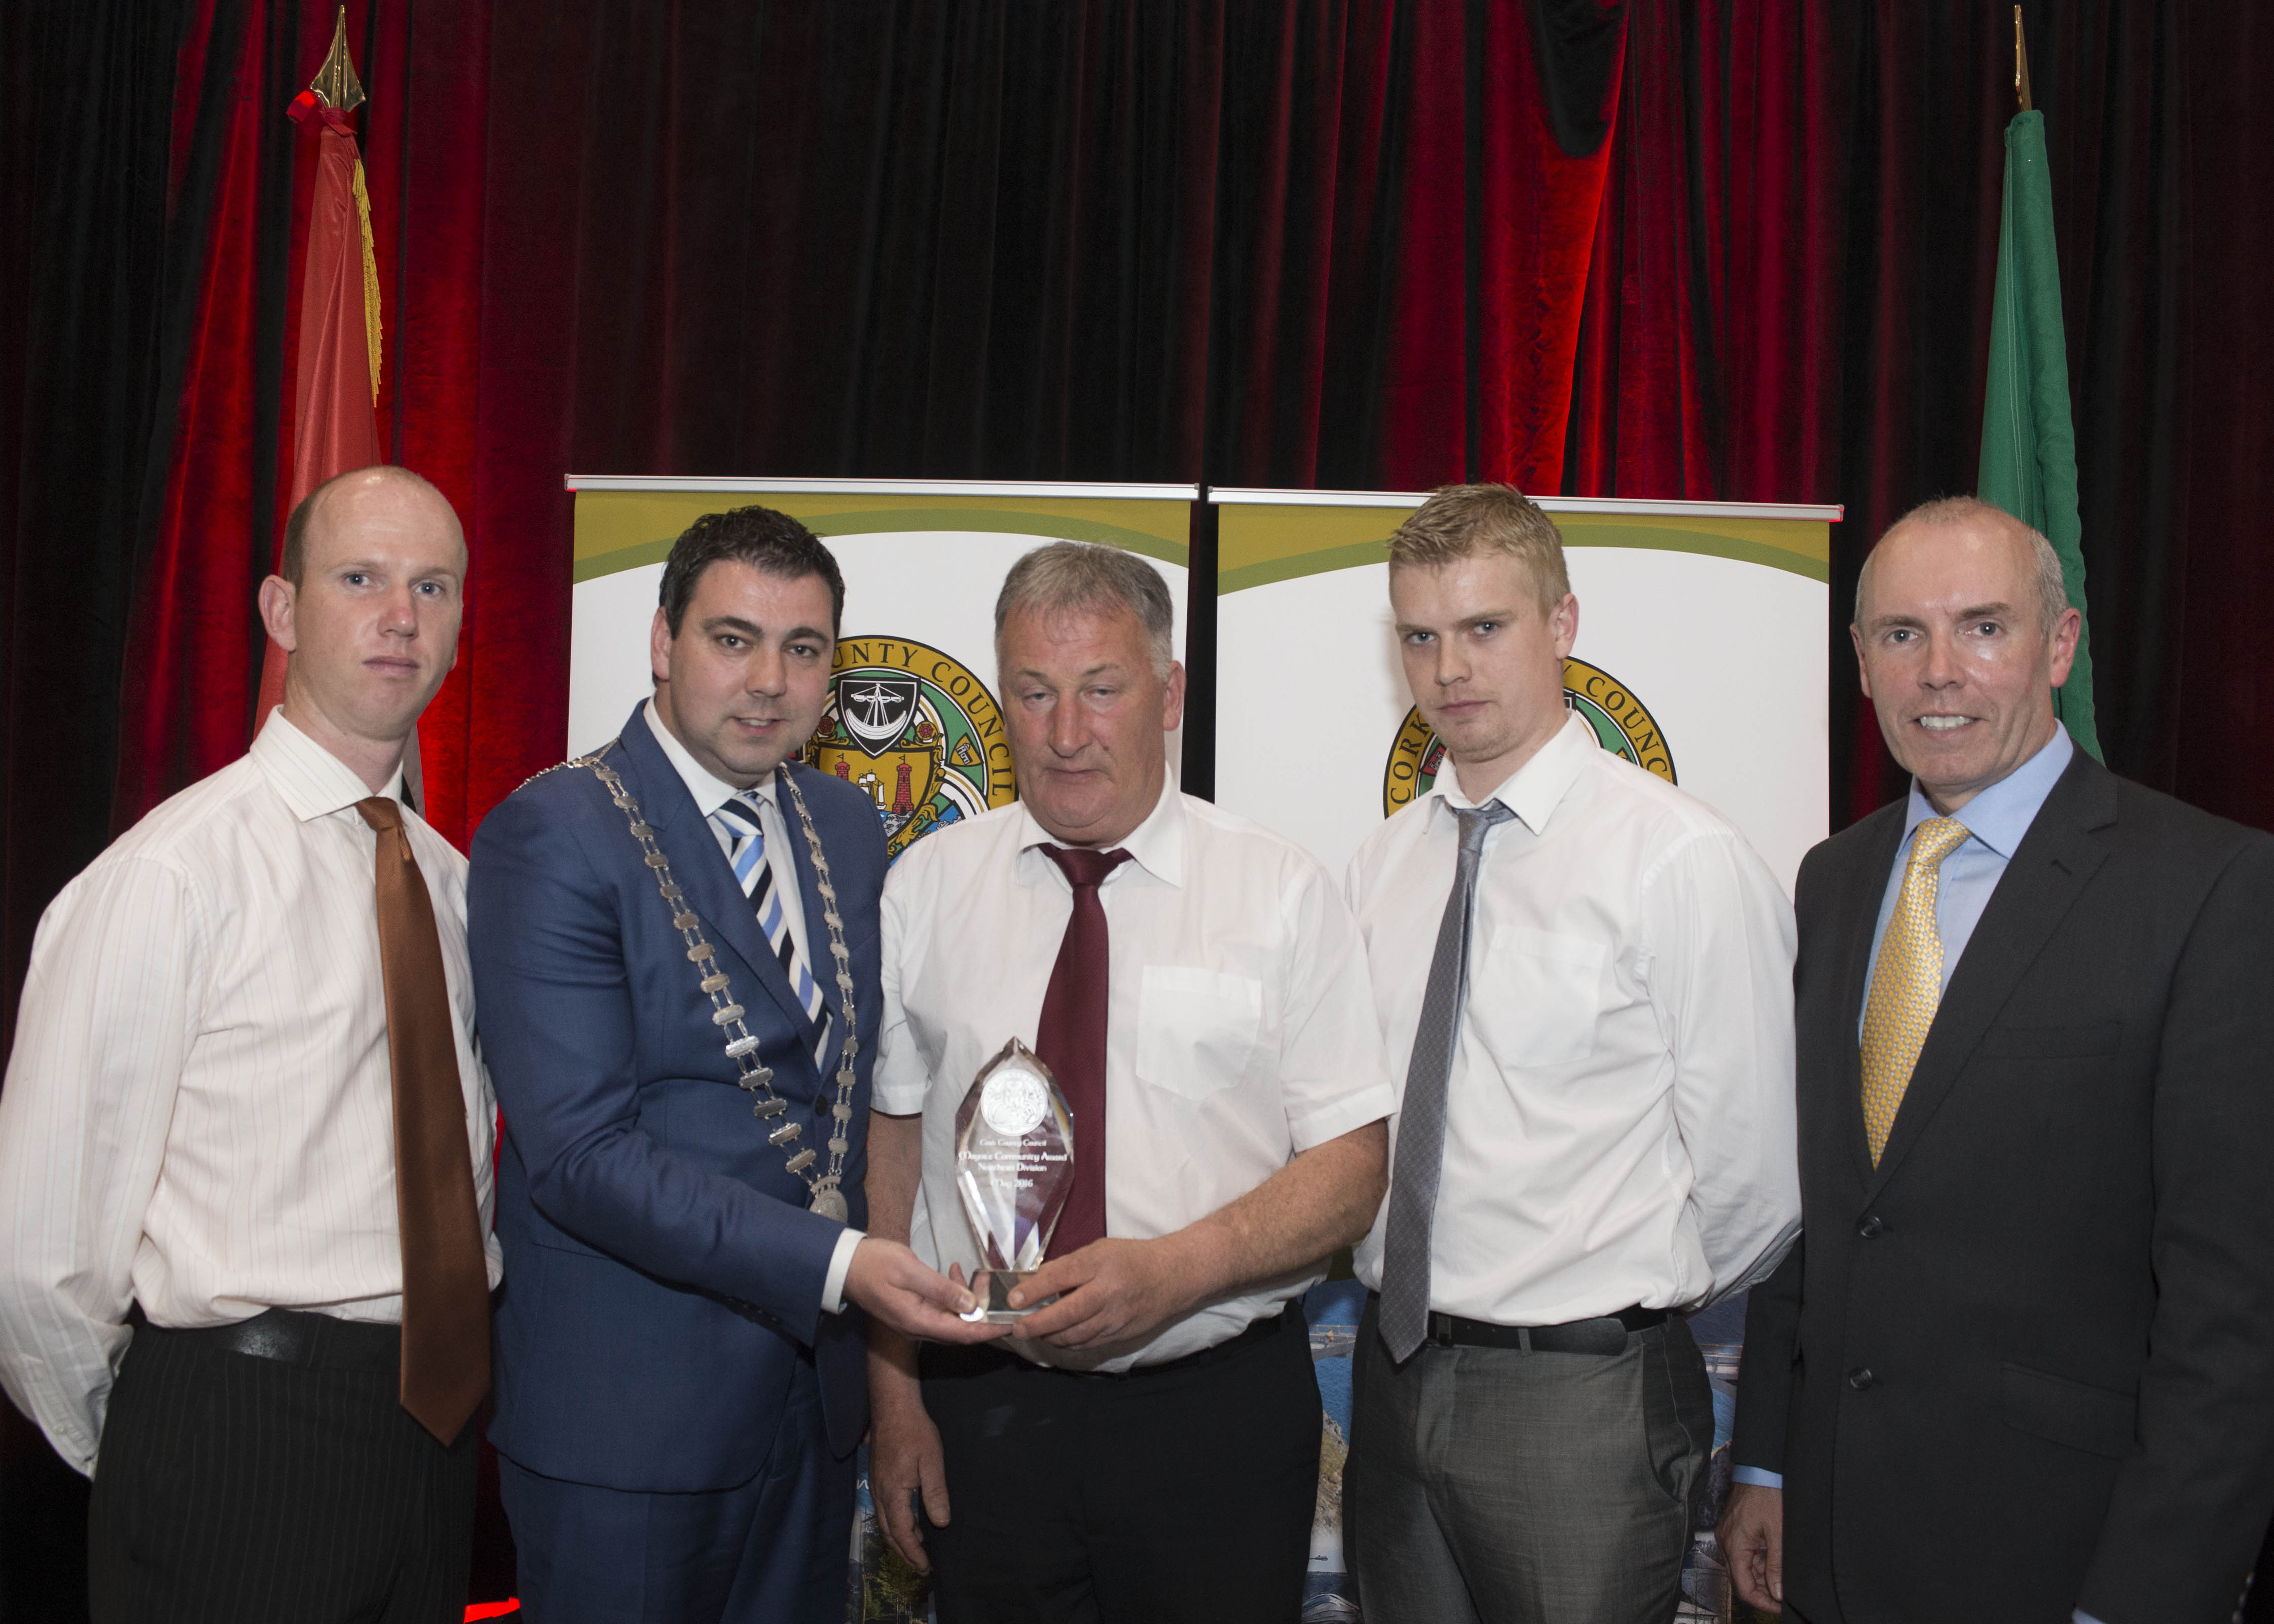 County Mayor Honours Volunteers and Leaders at Annual Community Awards 2016